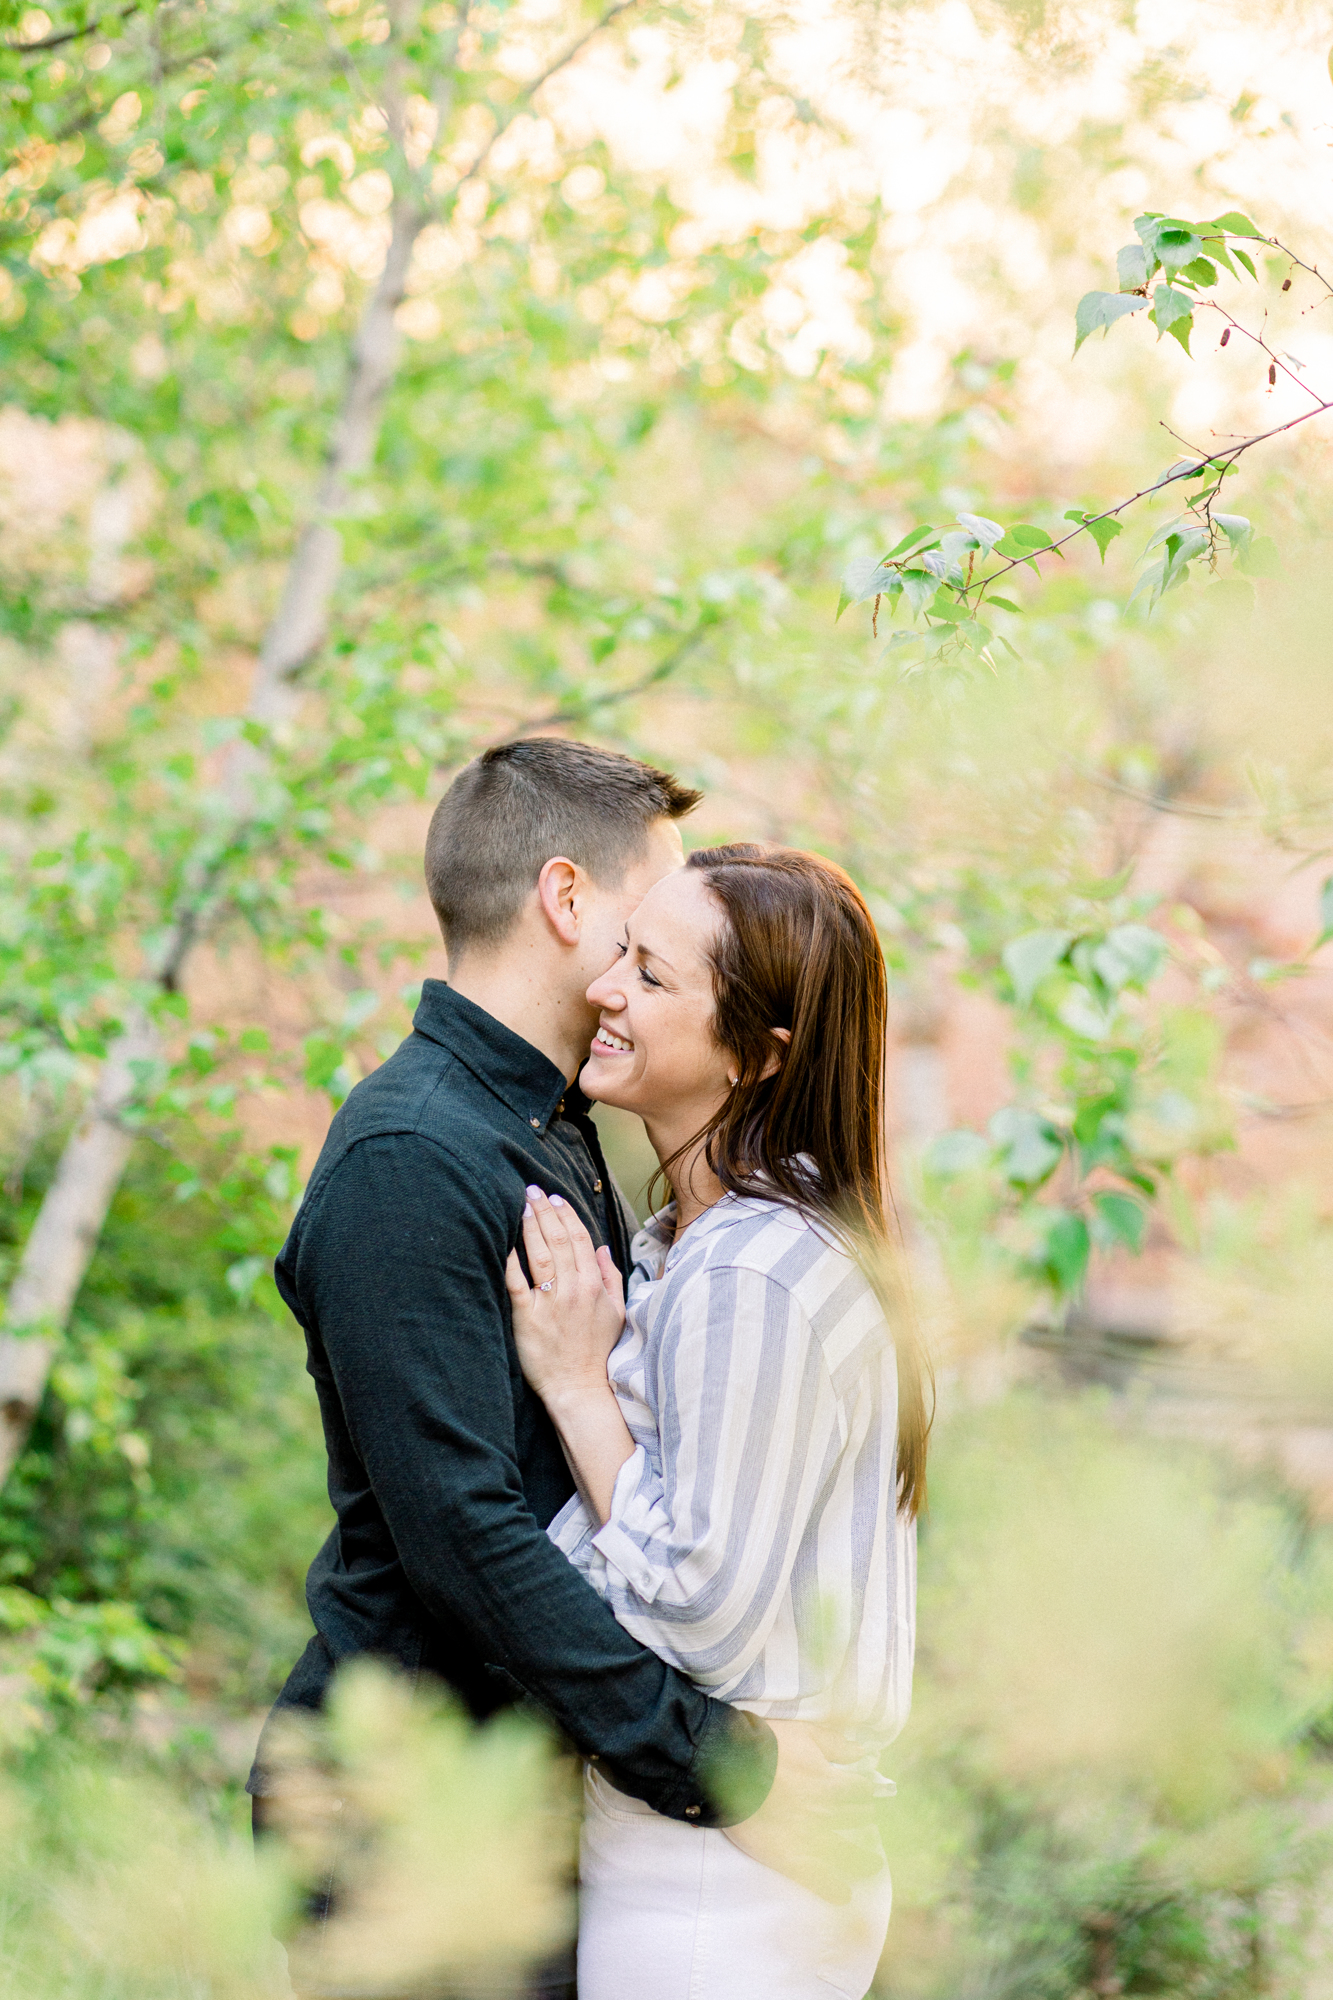 Flirty New York Engagement Photography with Spring Blossoms